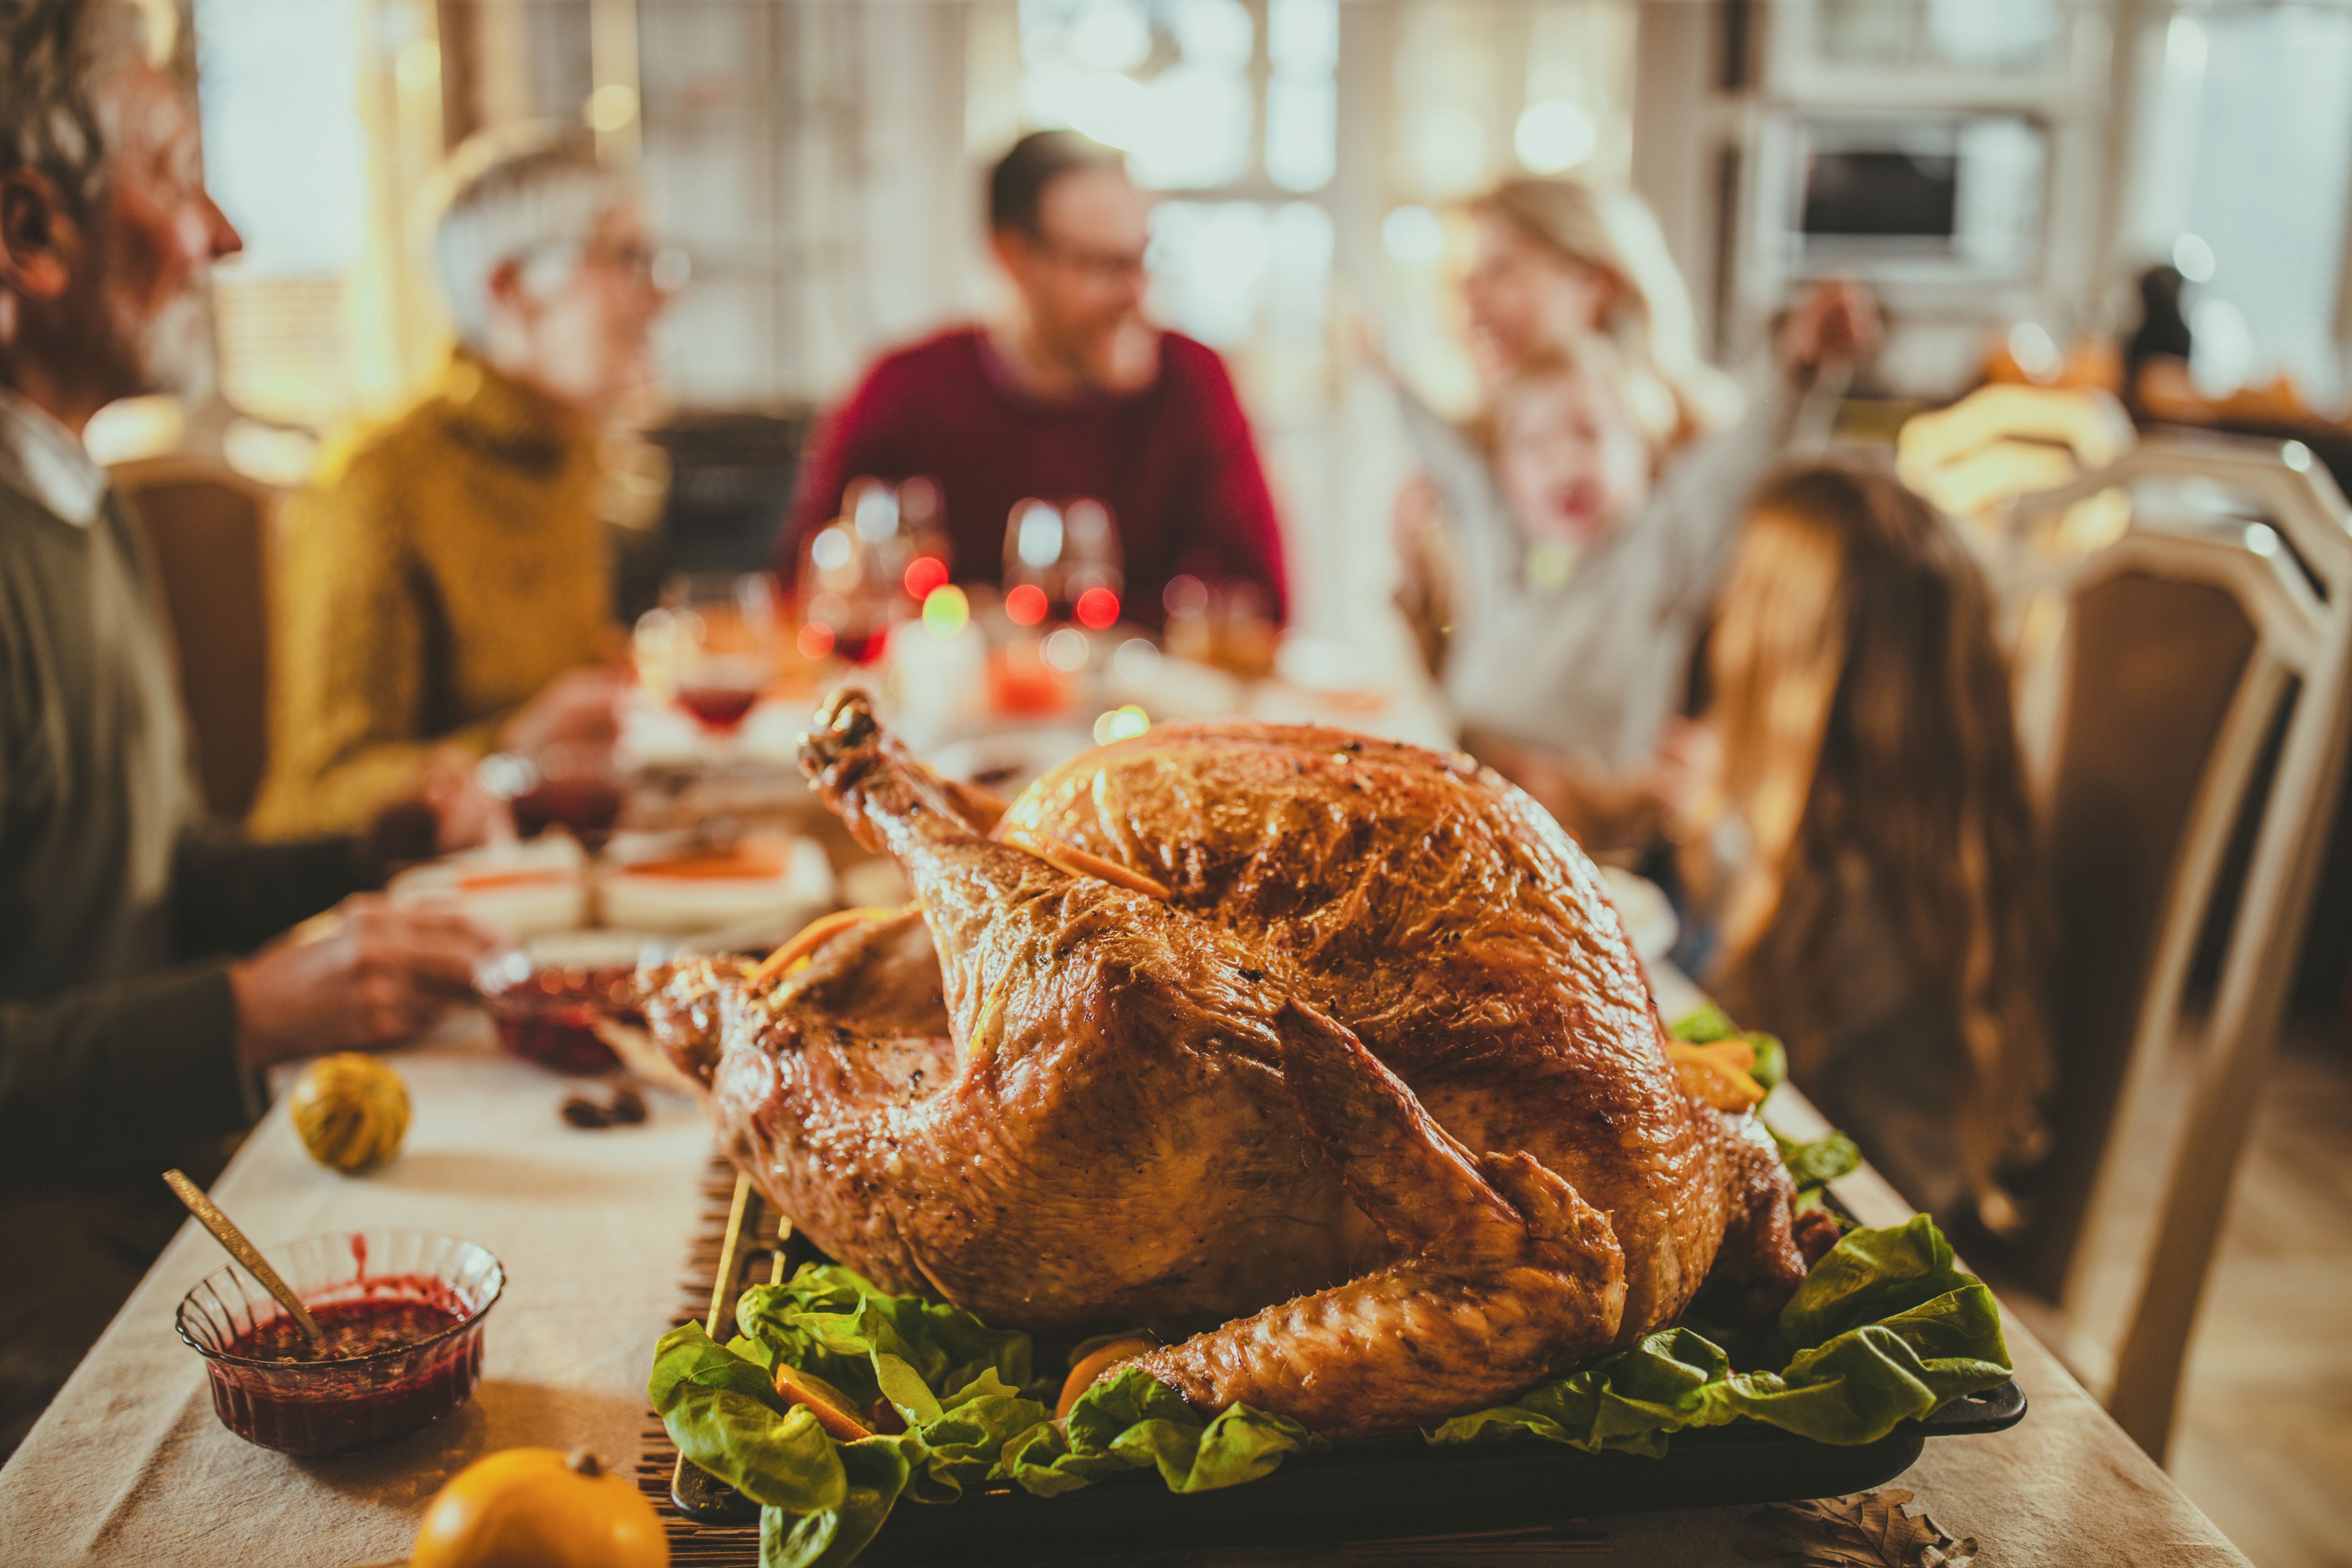 Turkey on the dinner table with a family behind. | Source: Getty Images